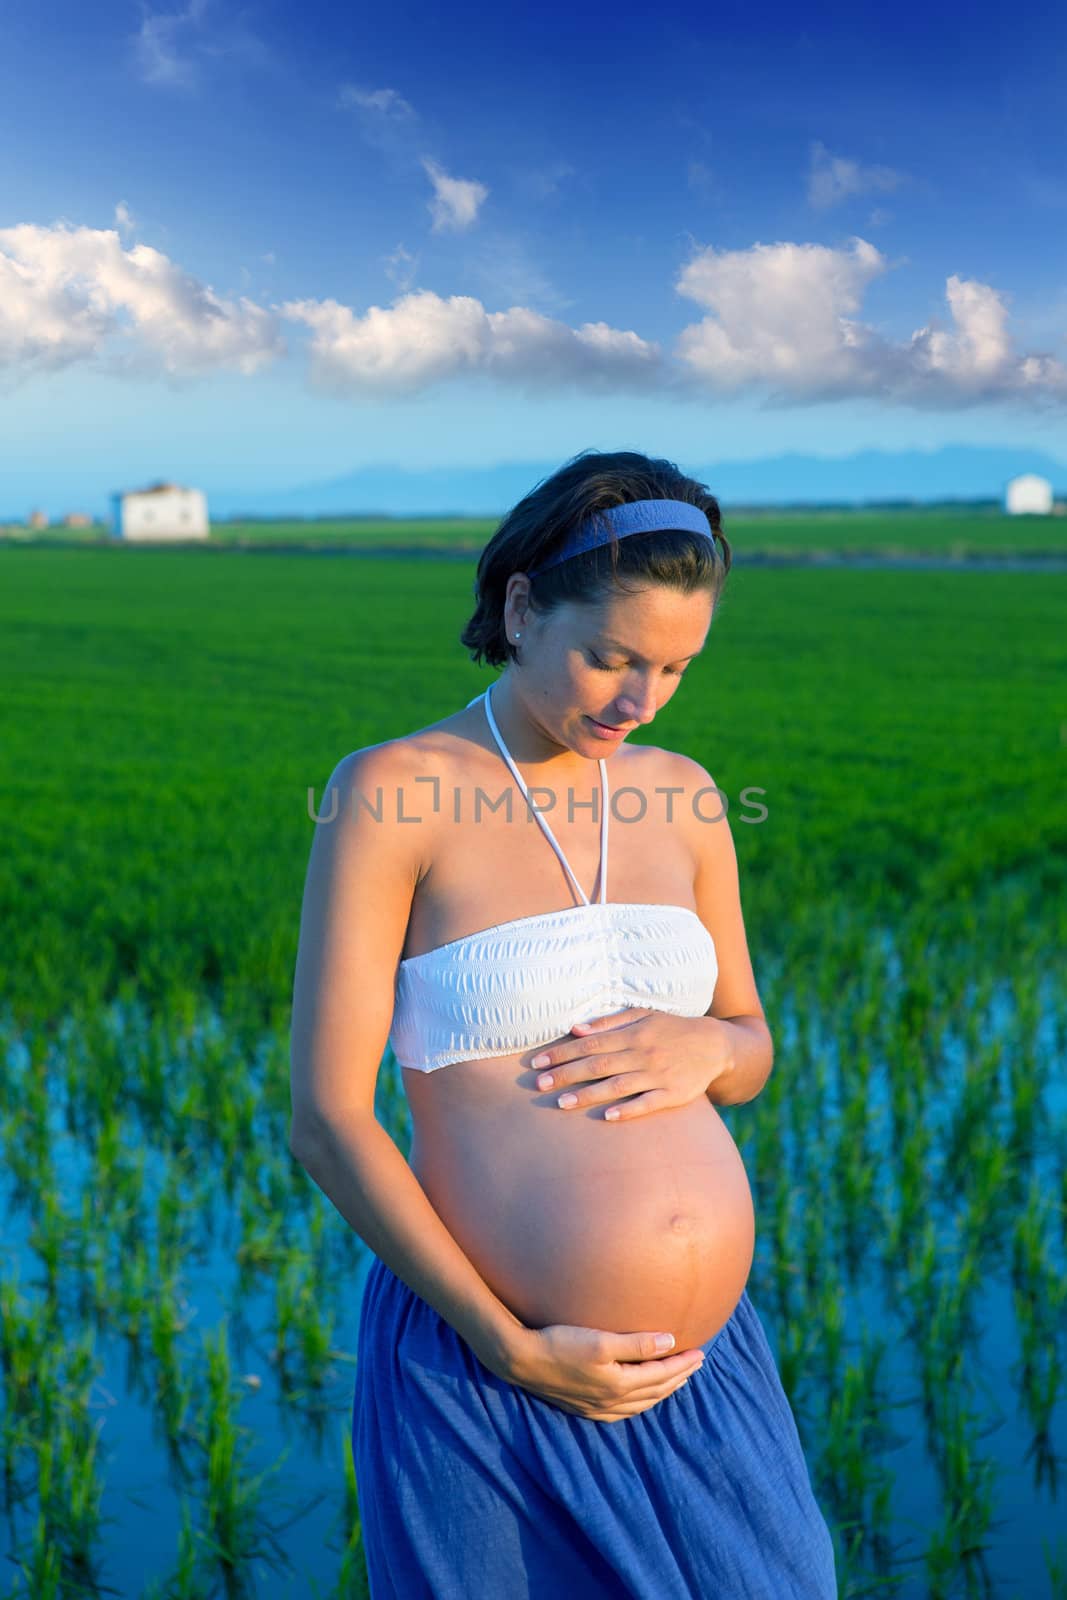 Beautiful pregnant woman walking outdoor nature on green rice fields